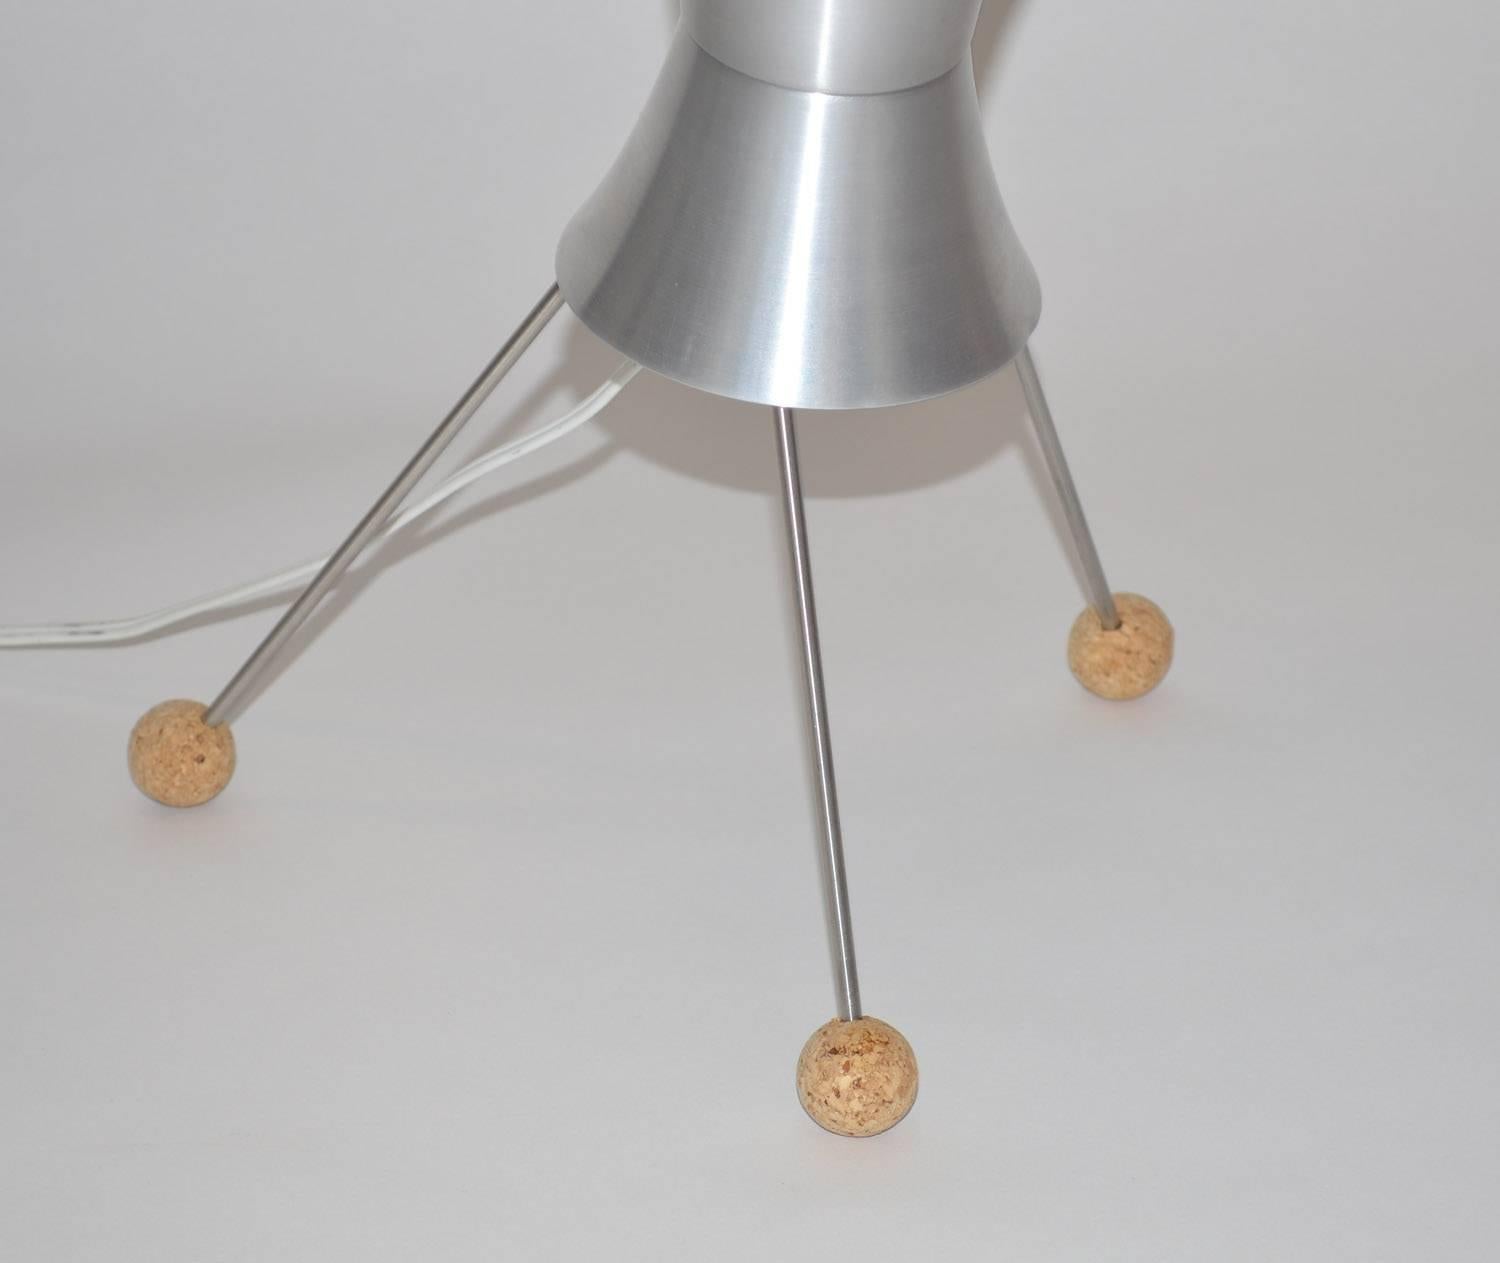 Mid-Century Modern Atomic Mid-Century Table Lamp by James Harvey Crate T-3-C c. 2000